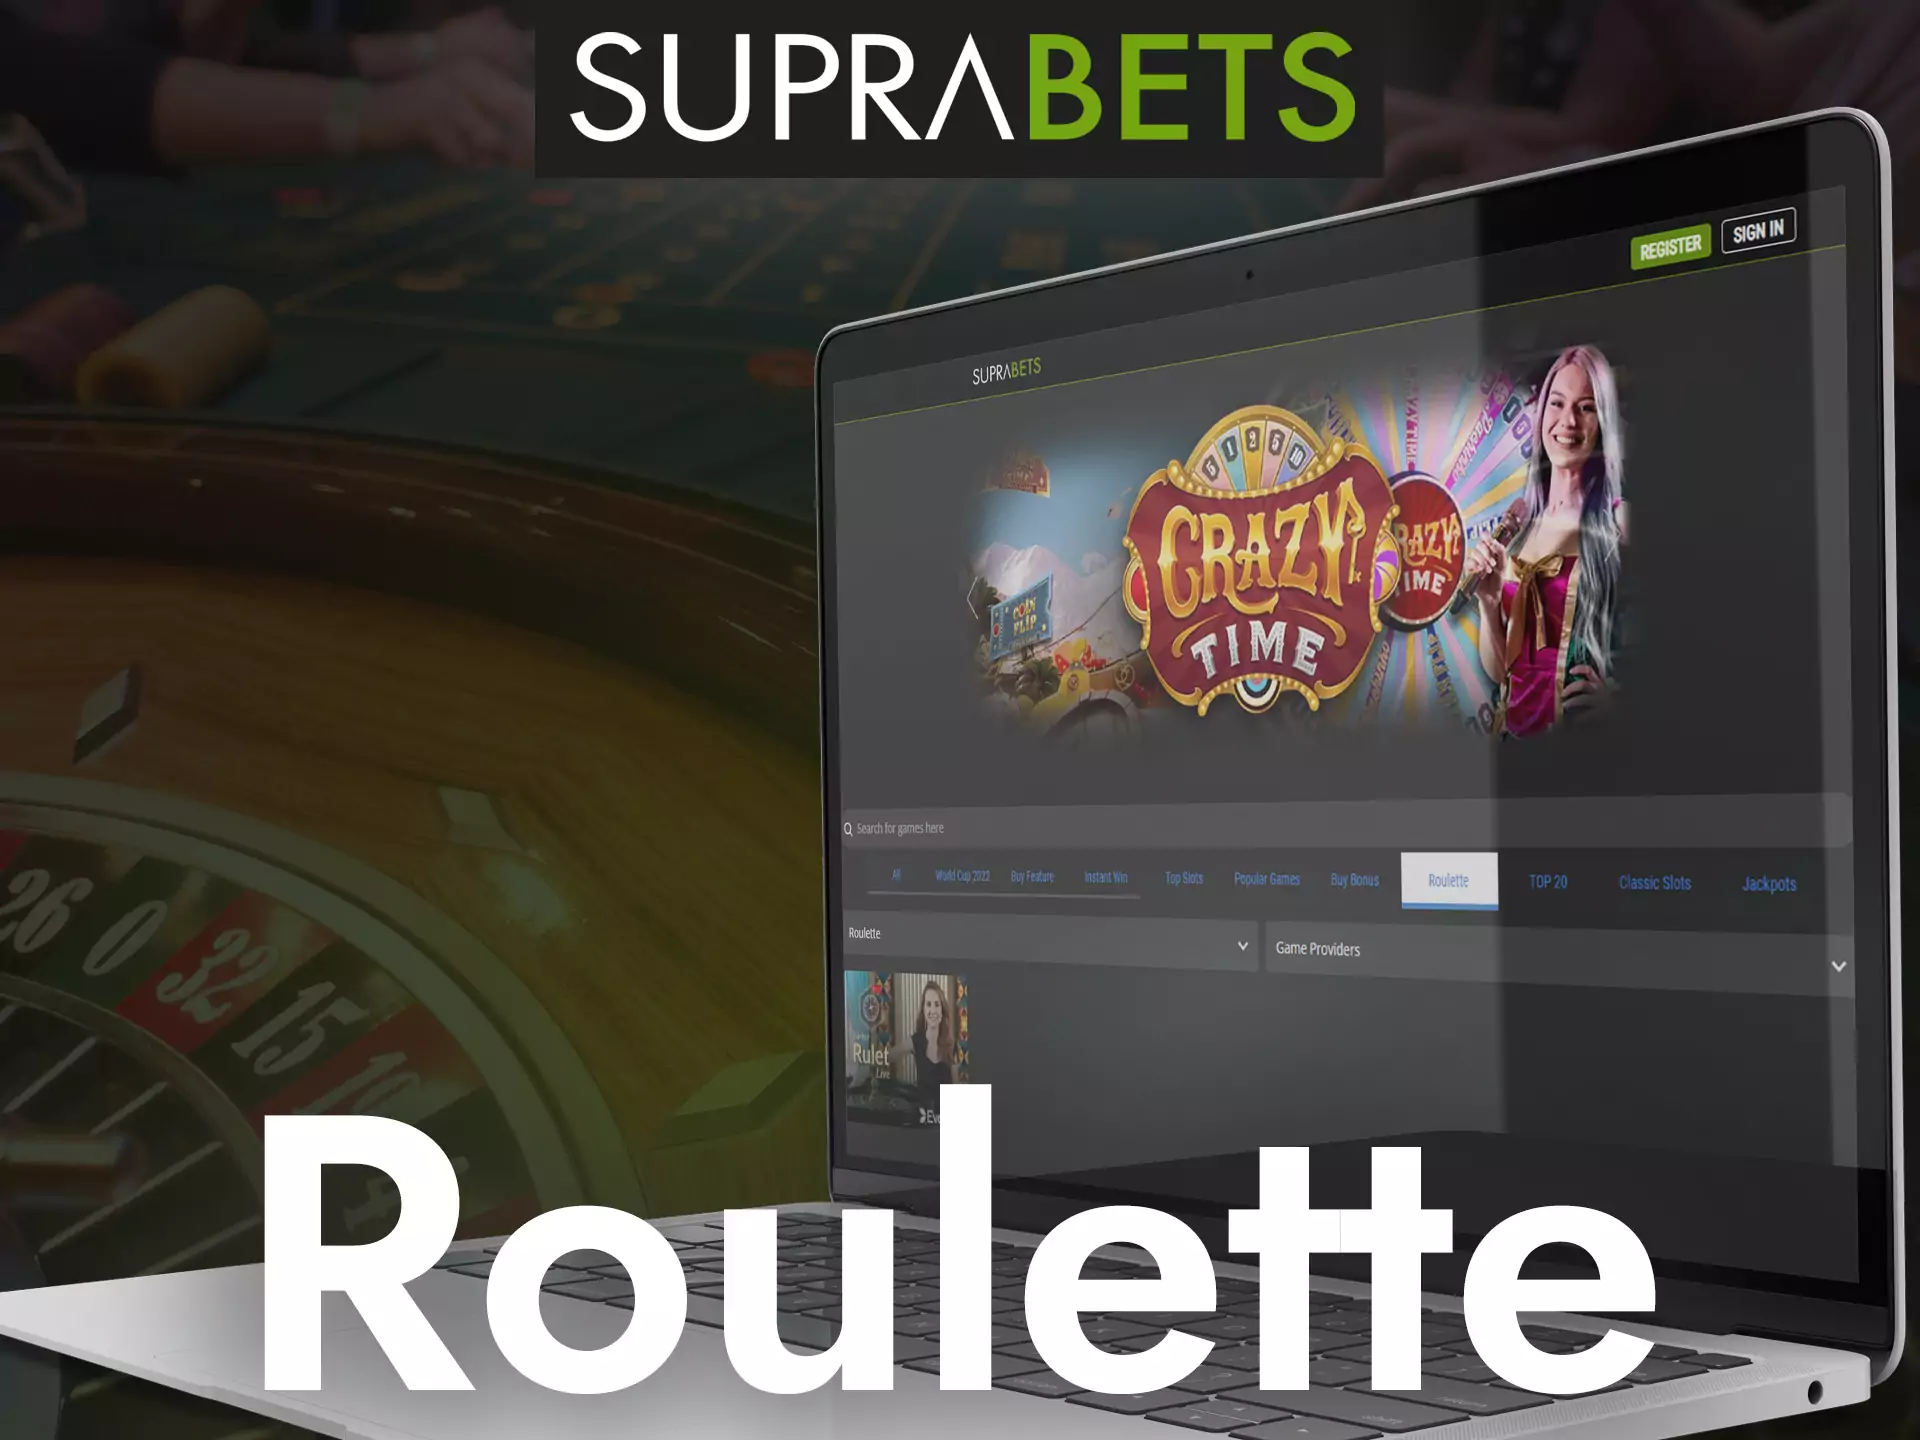 Suprabets Casino offers to play roulette.